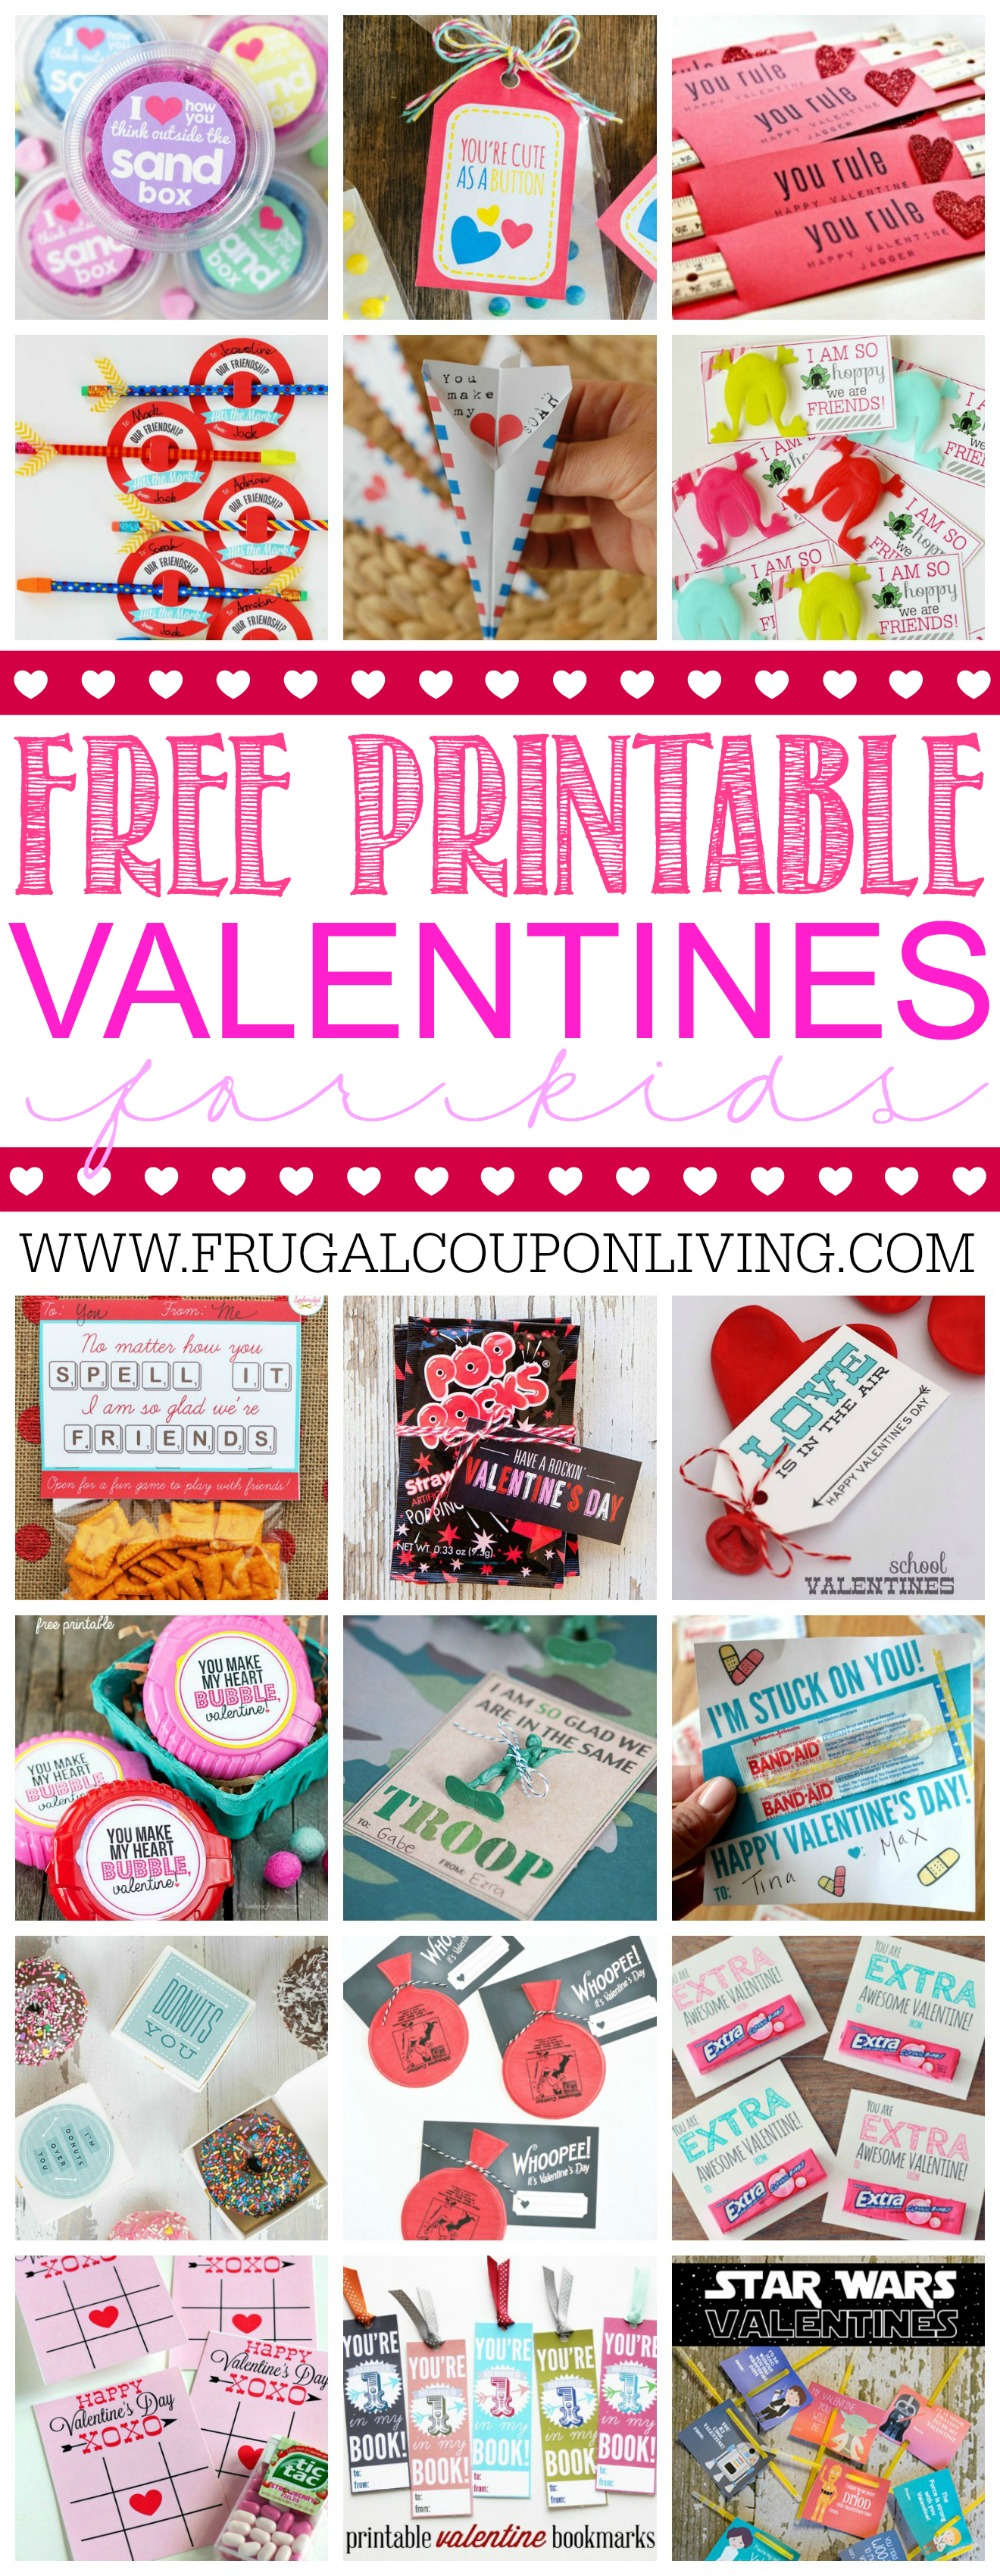 Printable-valentines-for-the-Kids-collage-frugal-coupon-living